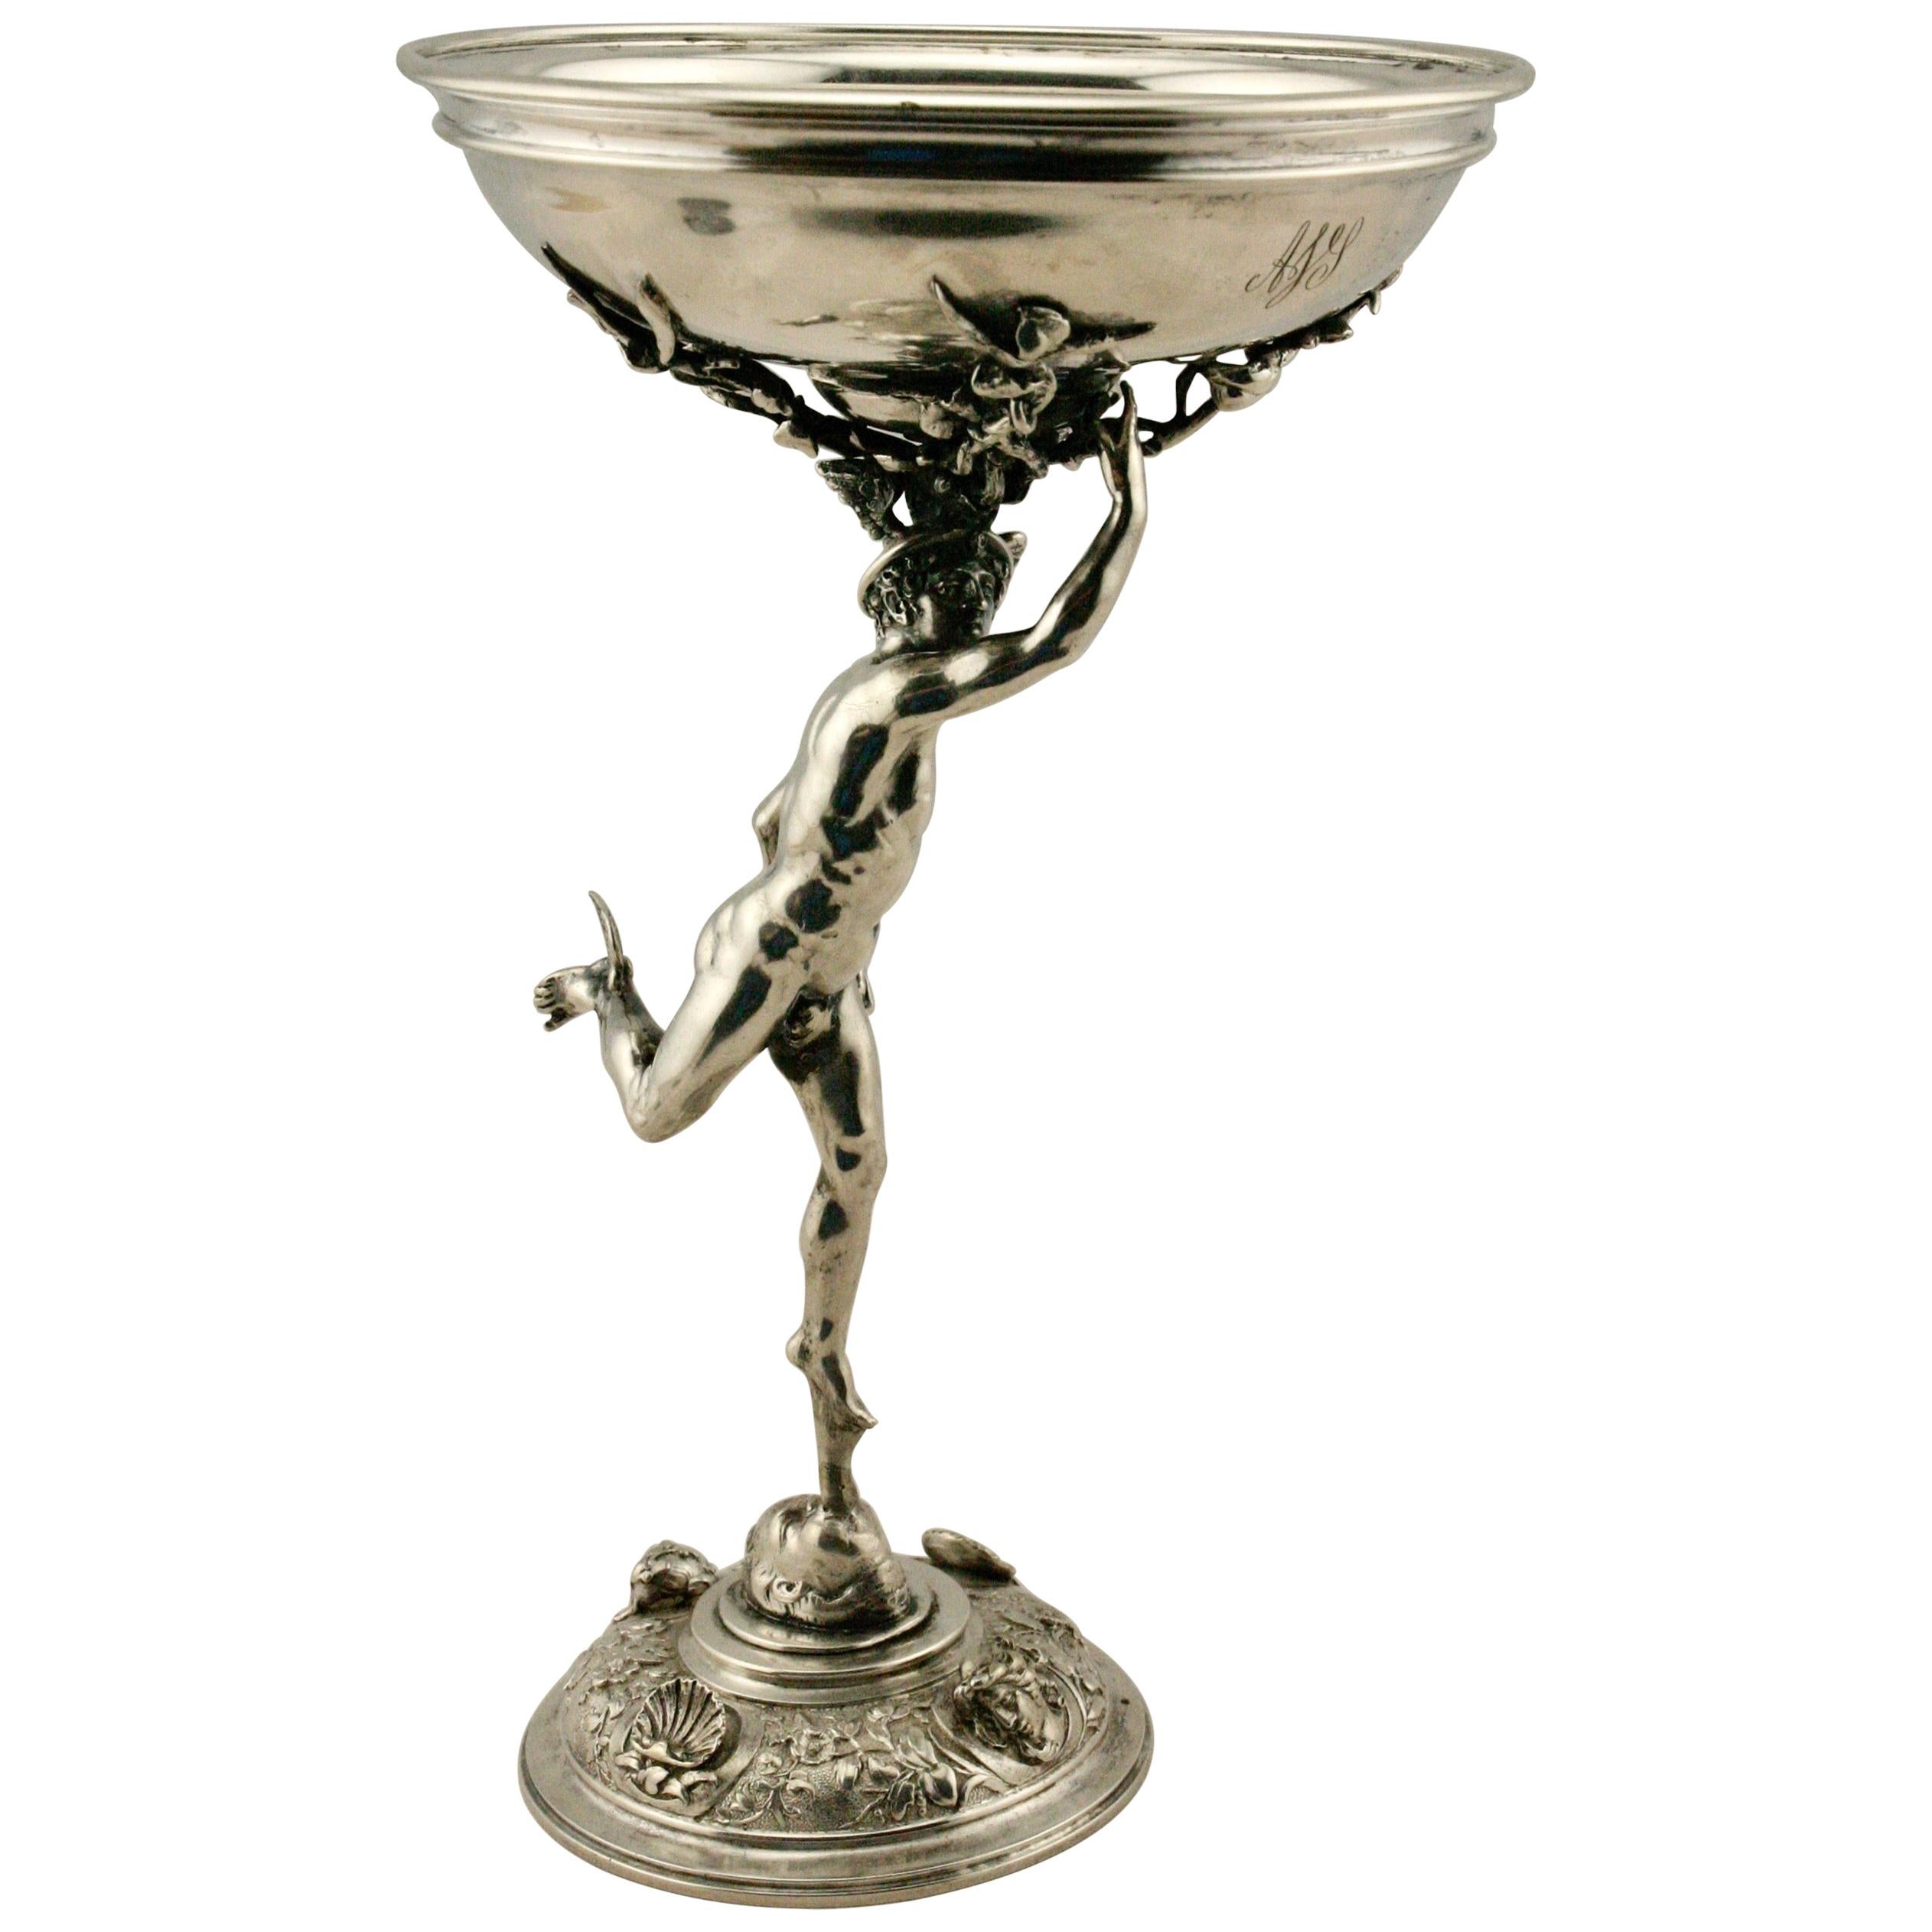 Italian Silver Figural Compote of Mercury by G. Accarisi, Florence